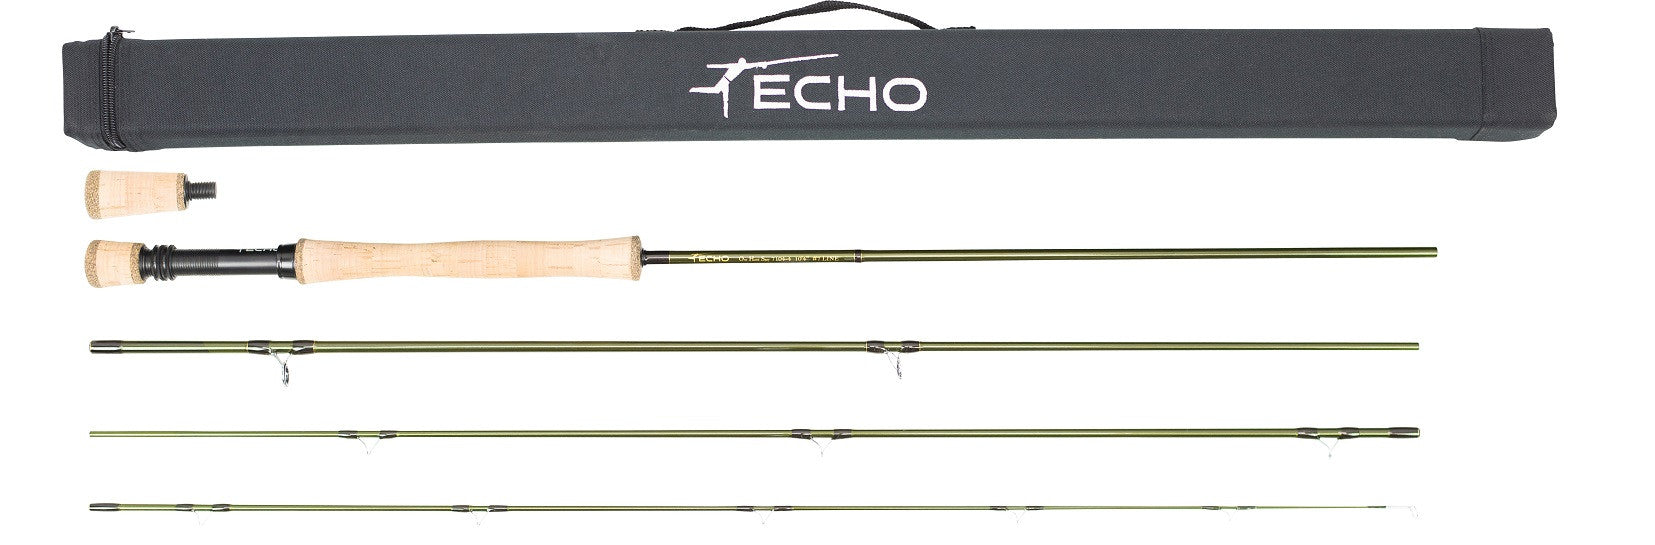 ECHO One Hand Spey (OHS) Fly Fishing Rod - Echo Fly Fishing - NZ